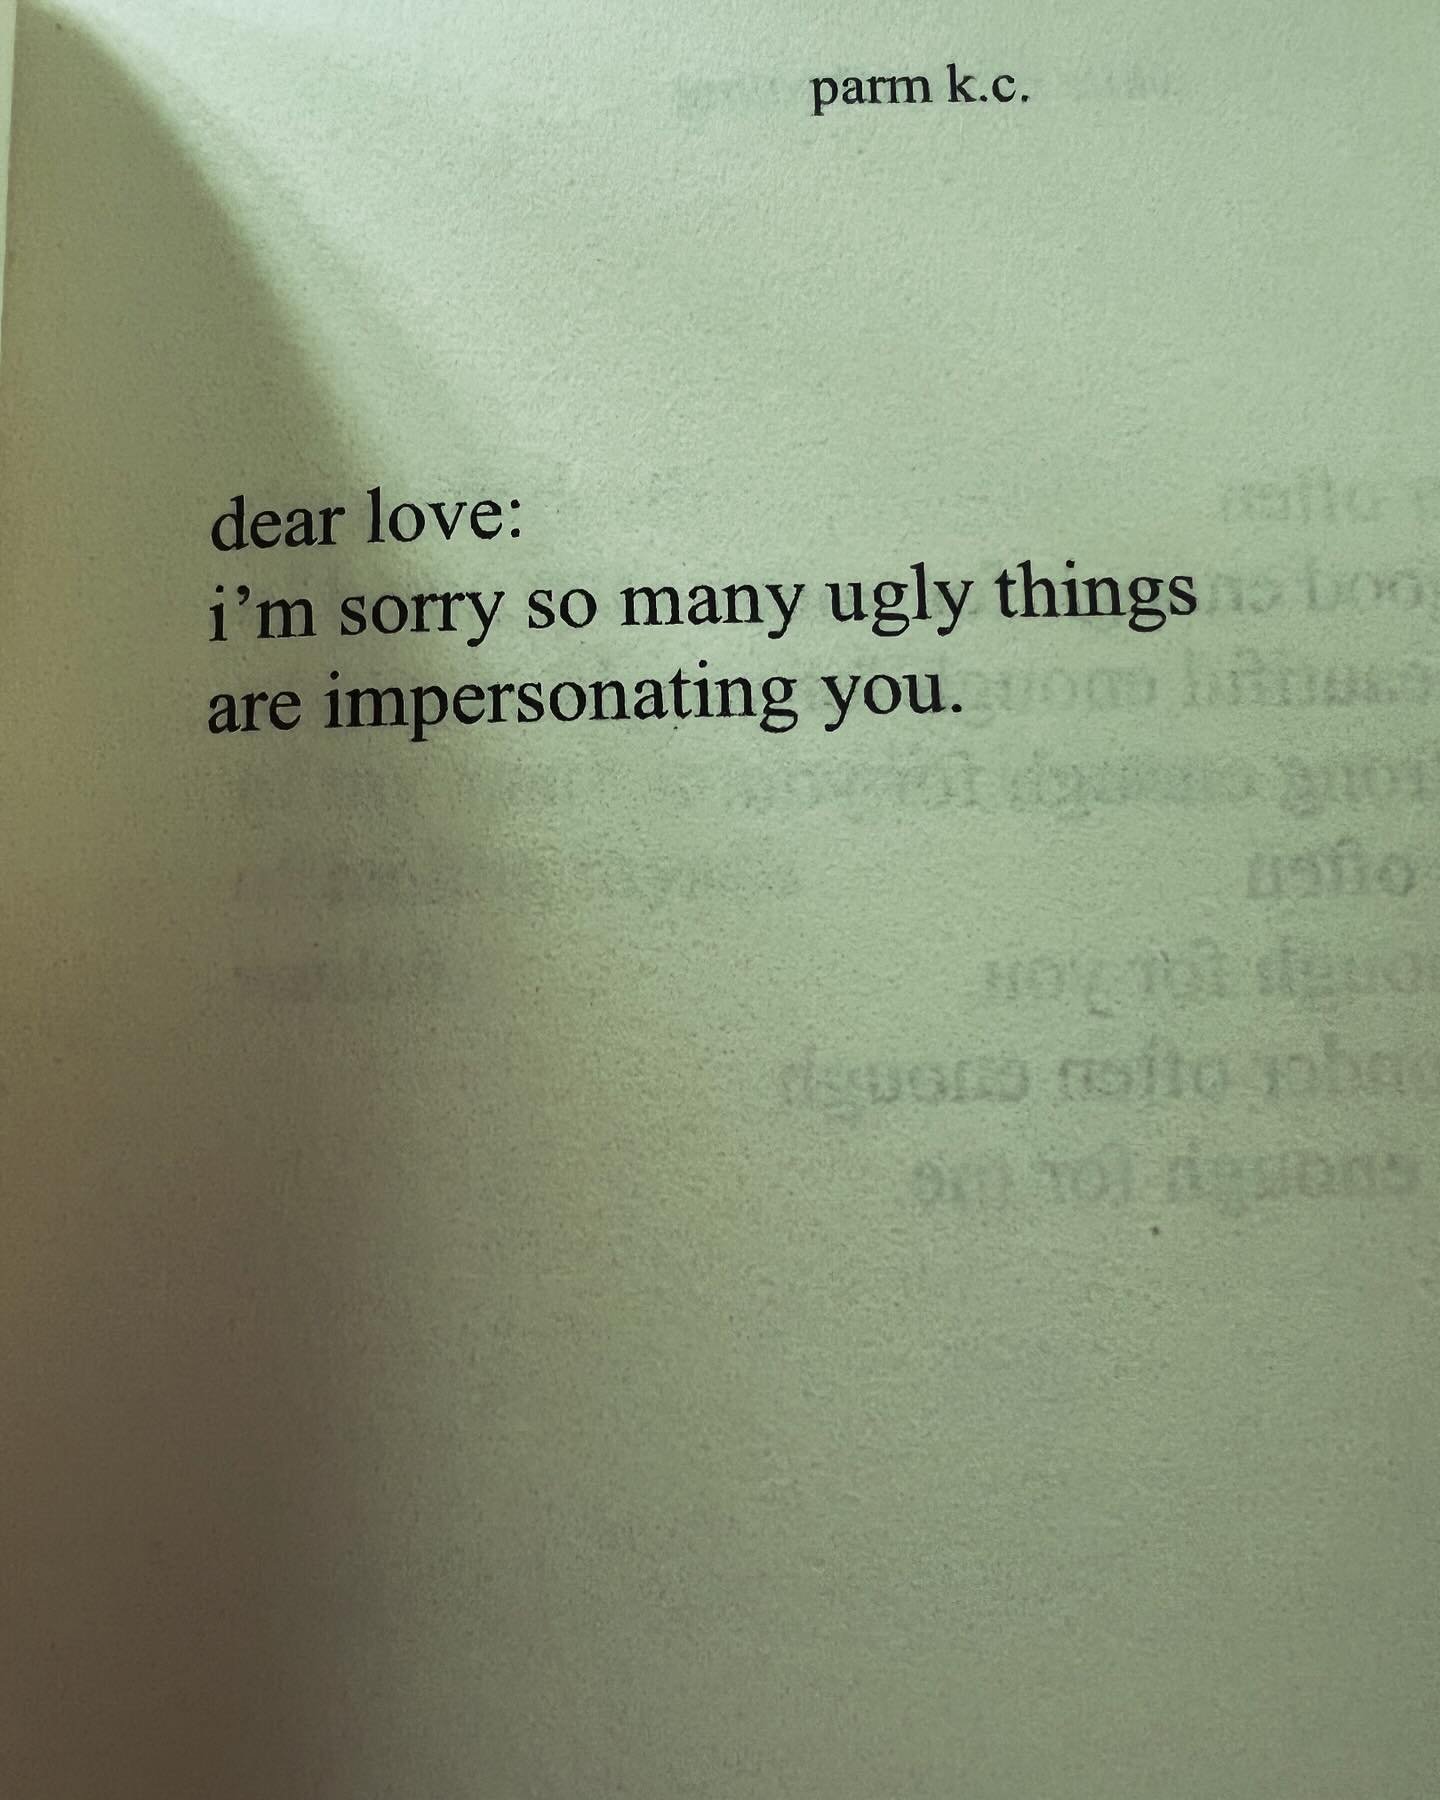 dear love:
I&rsquo;m sorry so many ugly things 
are impersonating you.

&mdash;parm k.c.

#hopefullament #grief #spiritualdirection #spiritualdirector #healing #wholeness